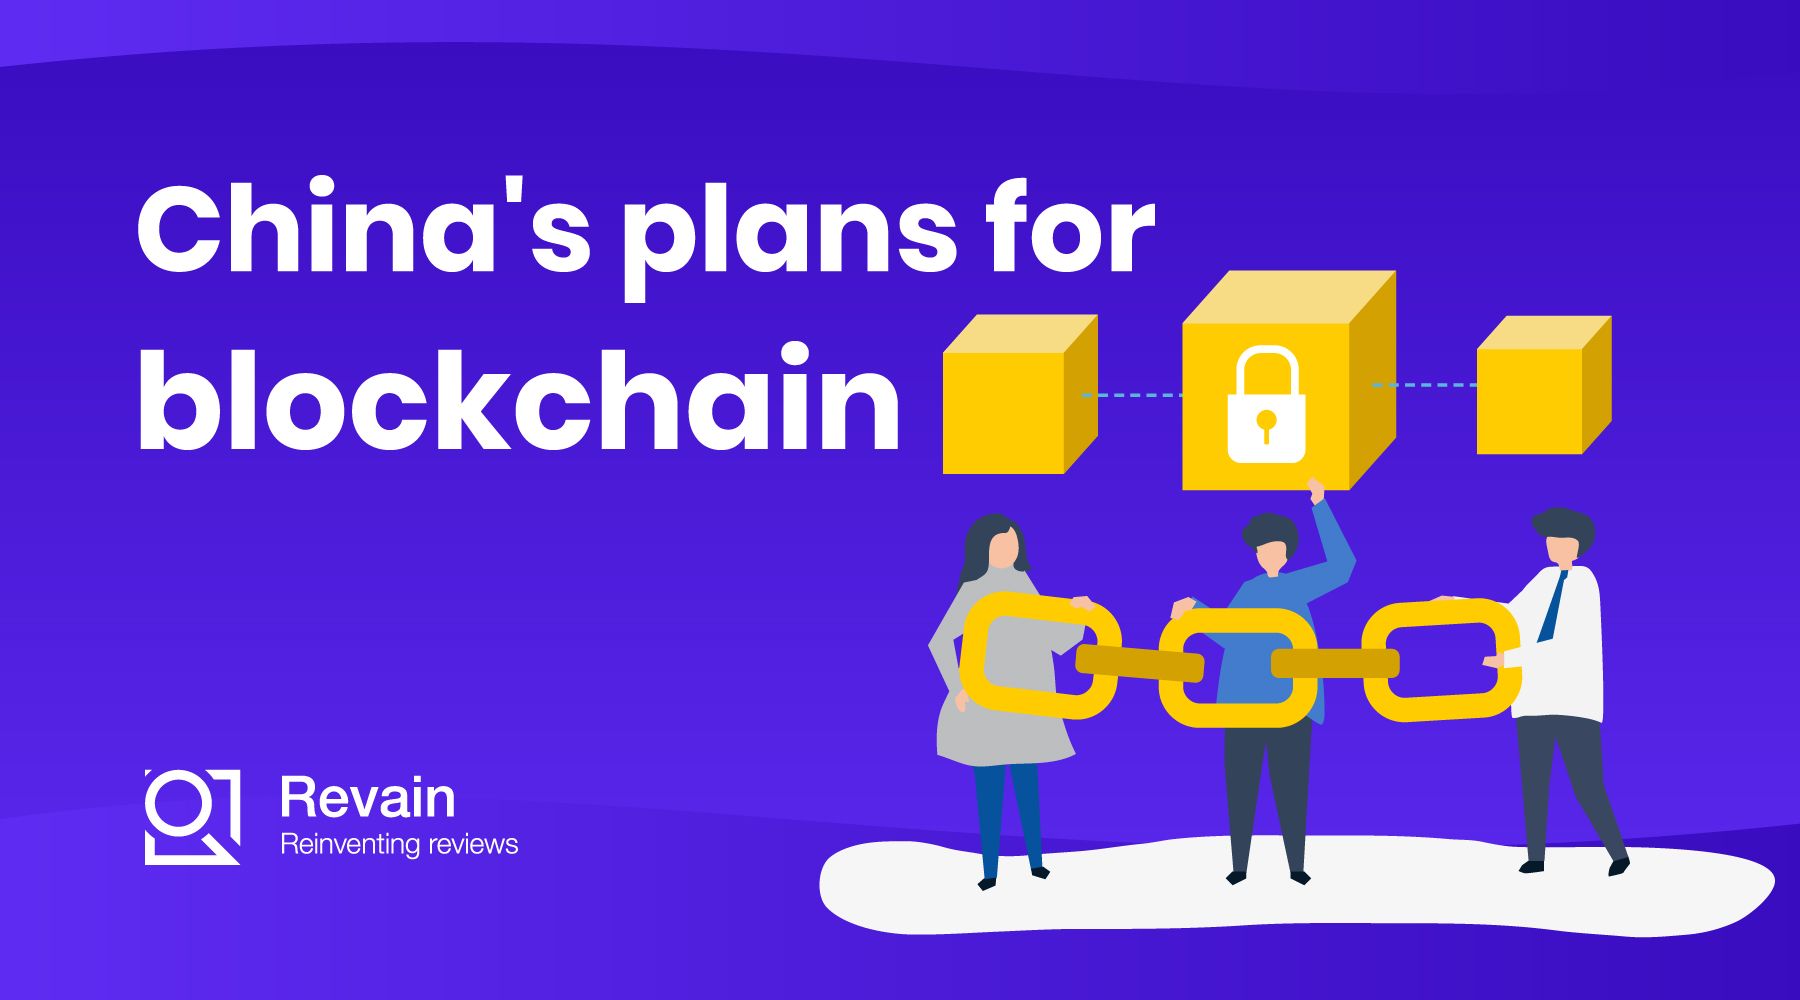 China's plans for blockchain